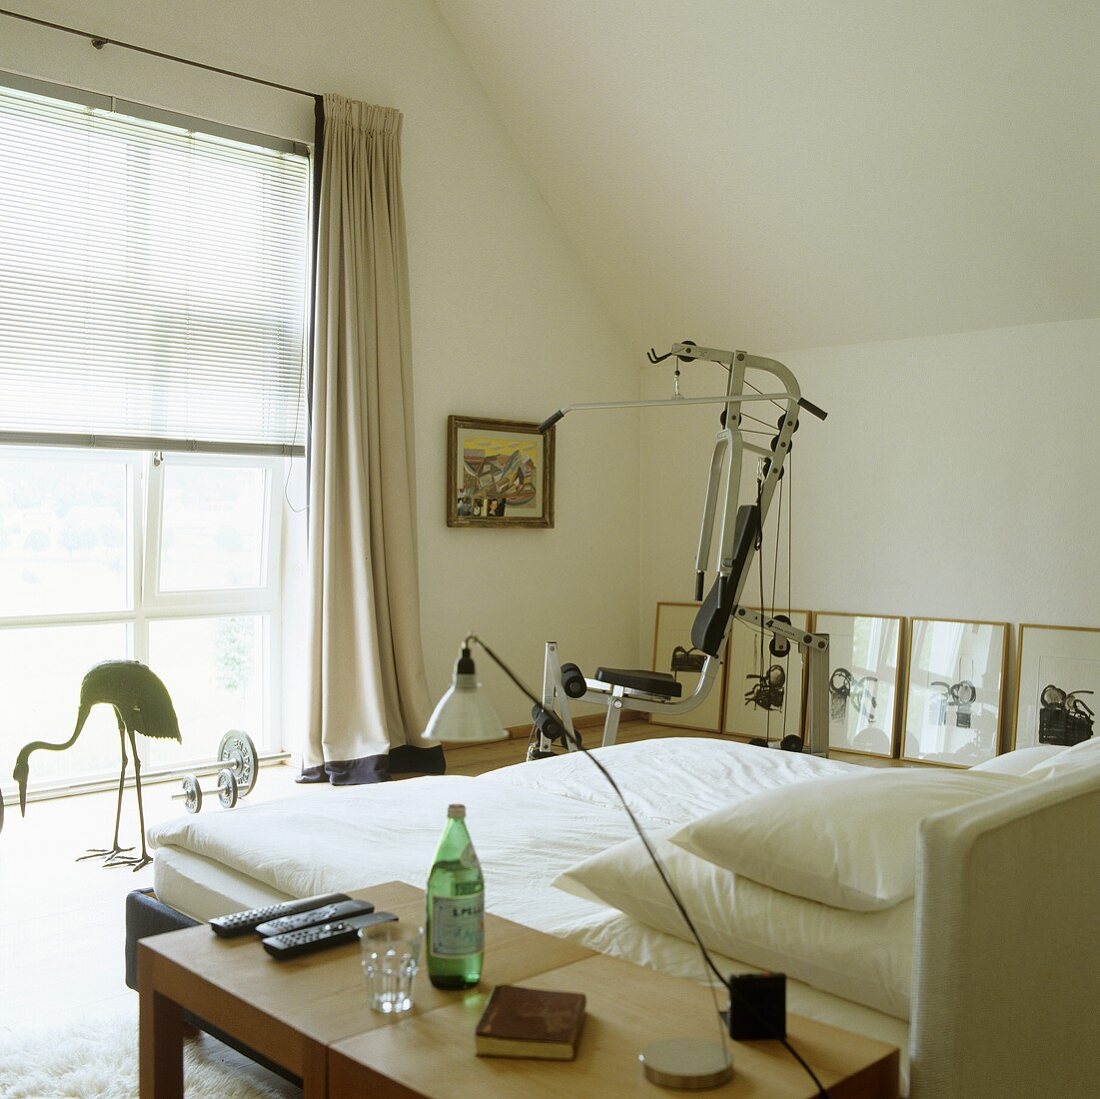 A fitness machine in a simple bedroom with a slopping roof